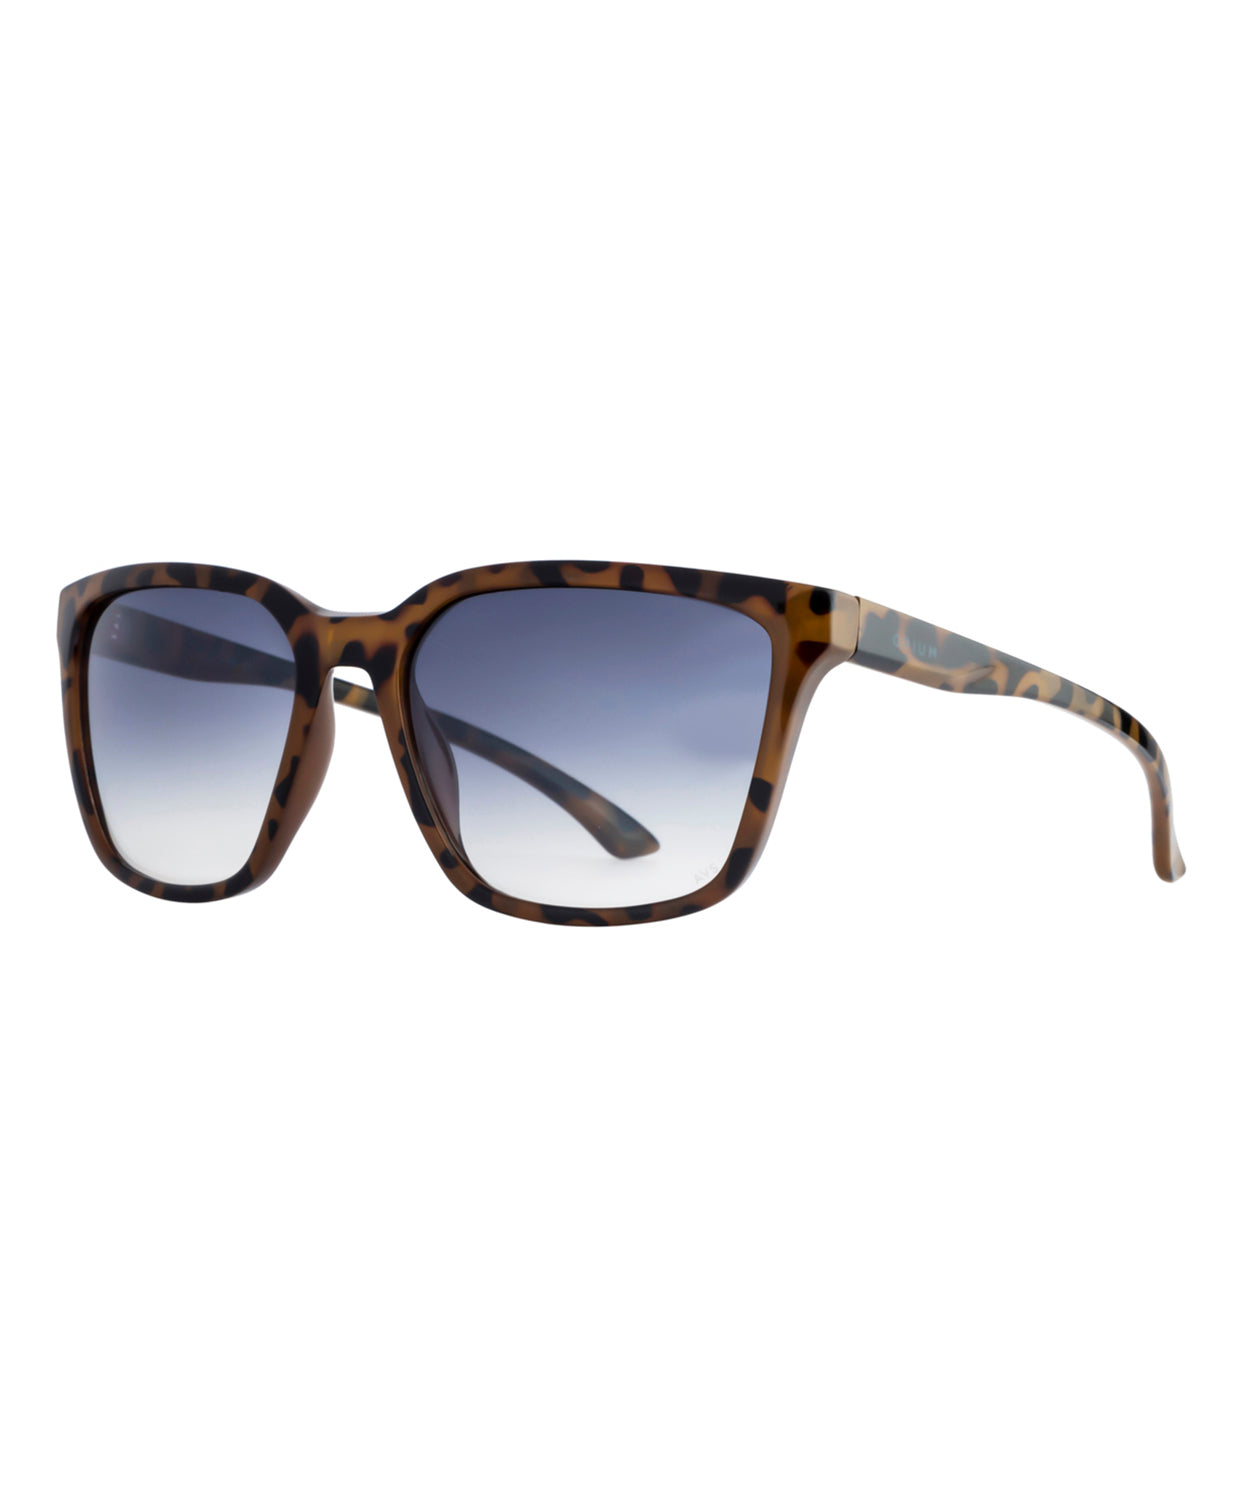 Buy Authentic Burberry Sunglasses Online in India at Sale